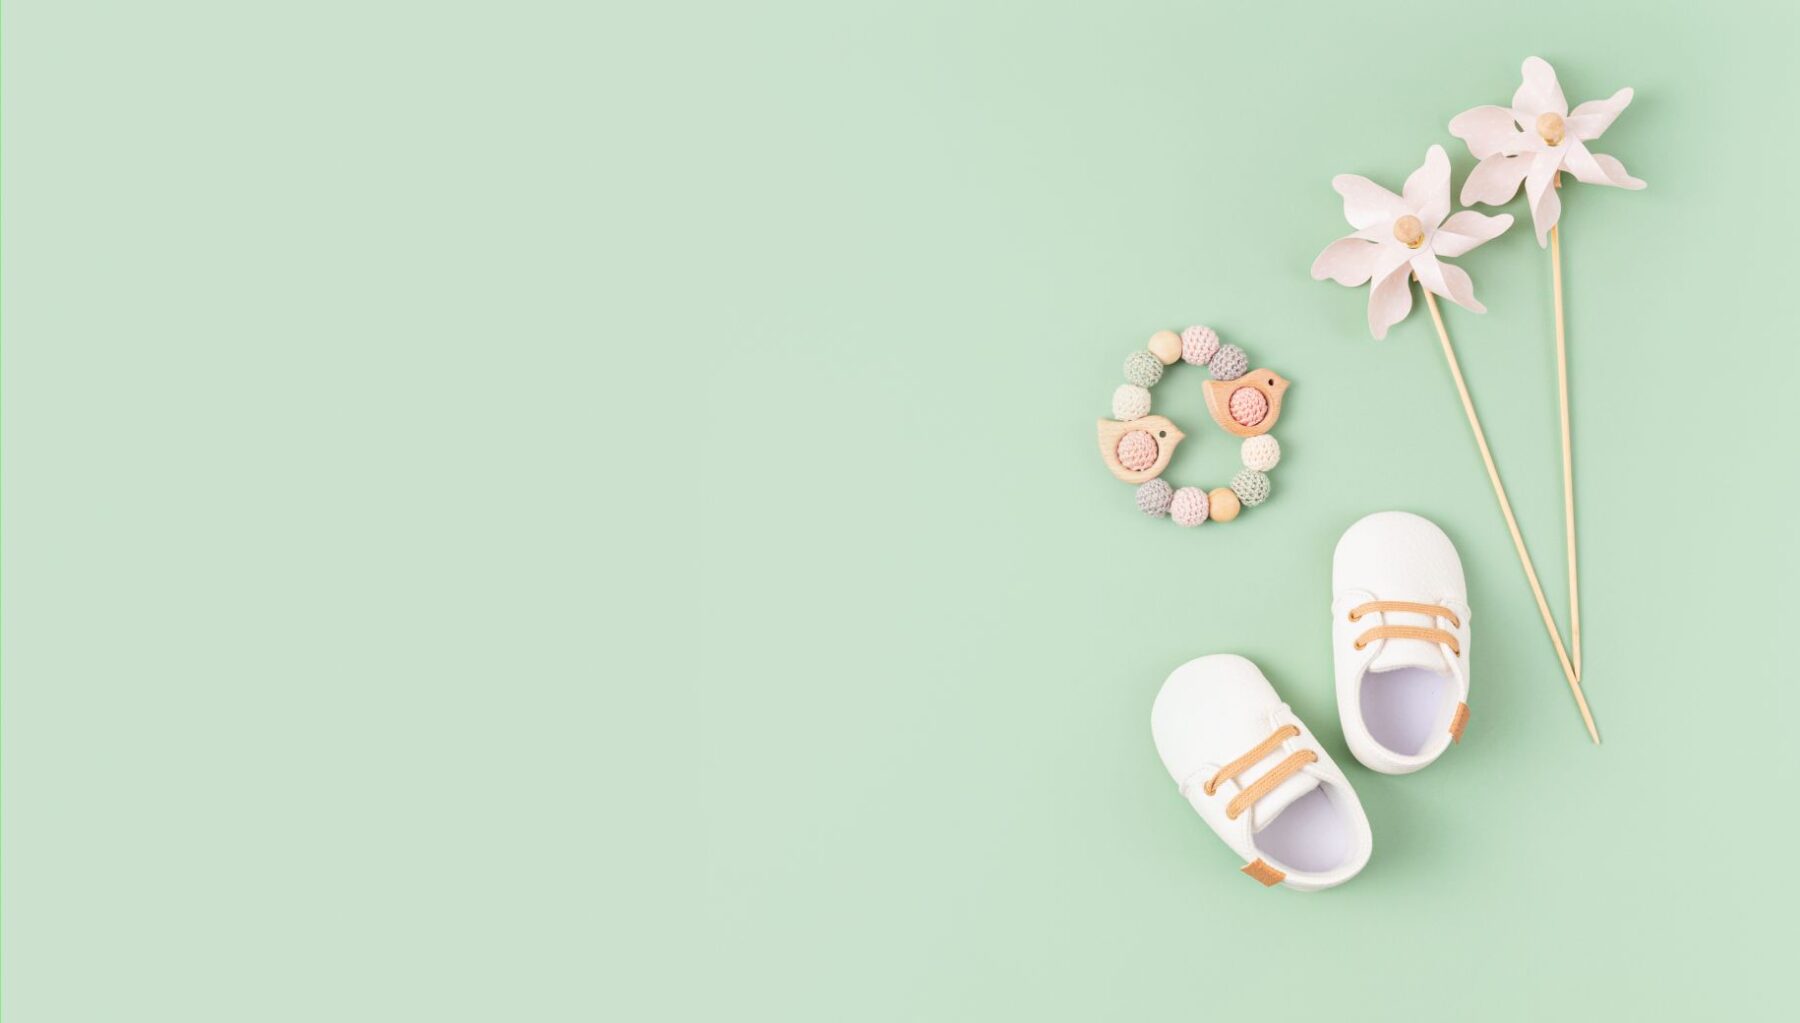 New baby shoes and toys against green background